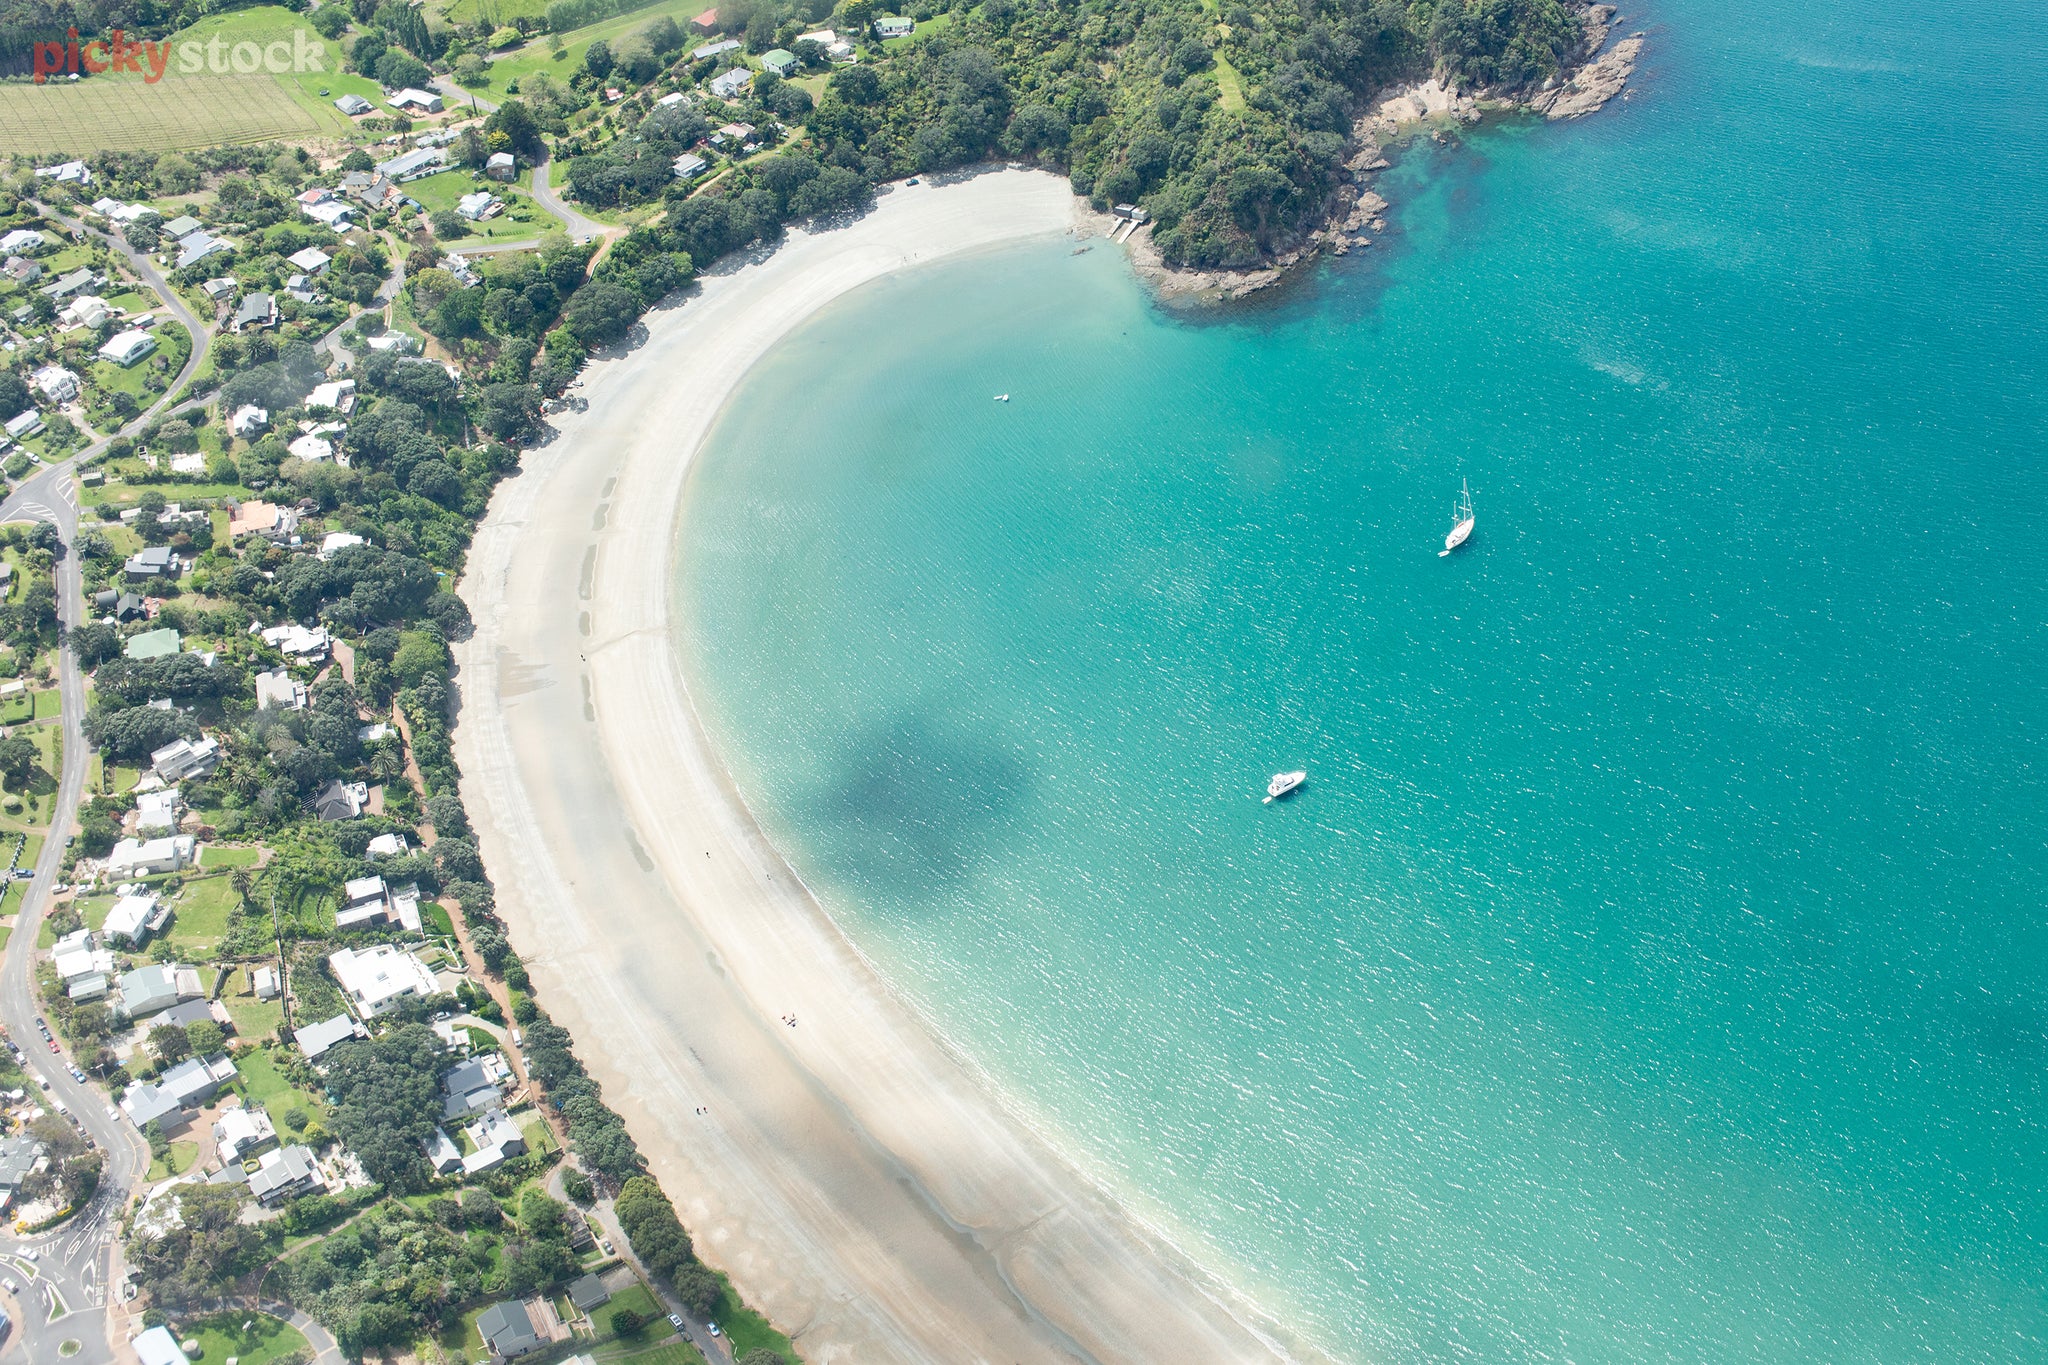 Aerial image of curved bay, where batches, sand and sea all meet. The water is vivid and turquoise with two white sailboats moored close to shore. 